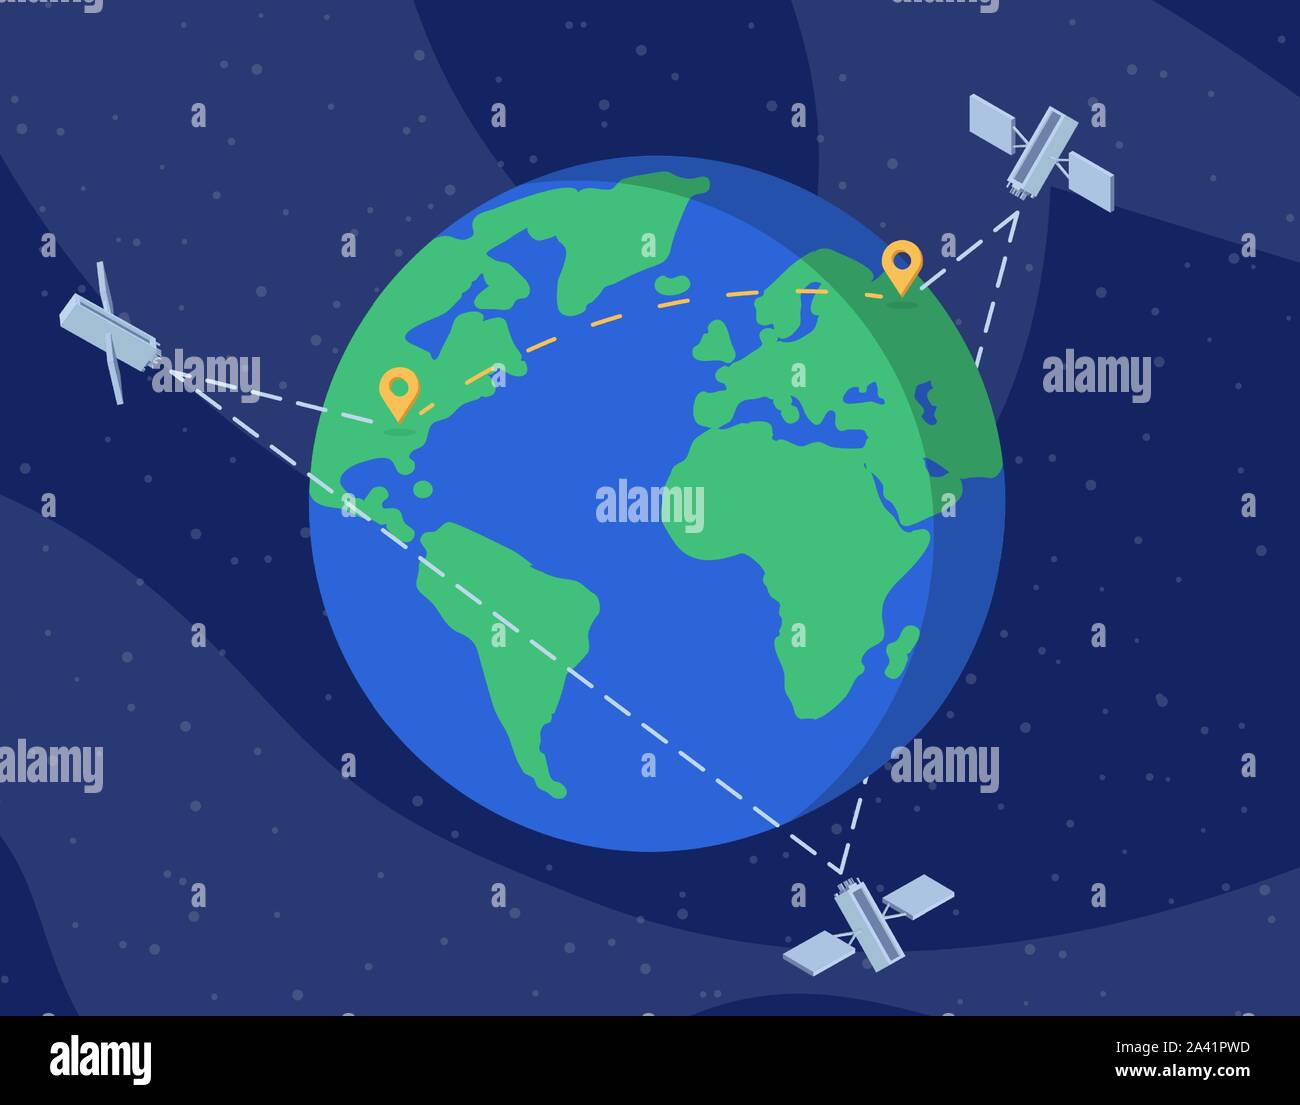 Global satellite network flat vector illustration. International communication technology, wireless information transfer cartoon concept. Telecommunication equipment, space probes and location marks Stock Vector